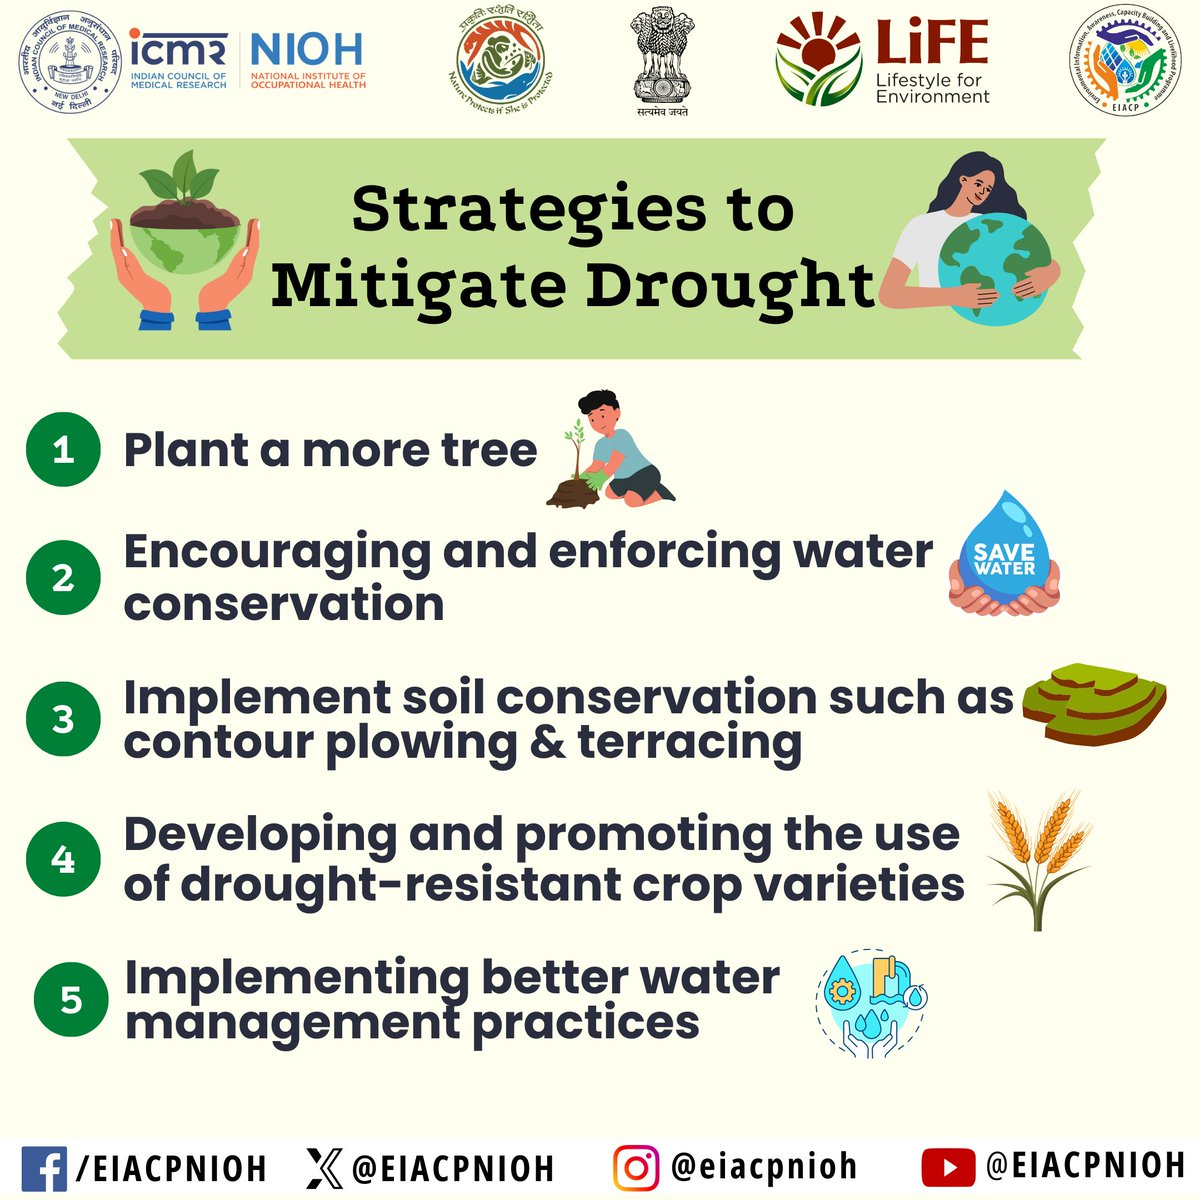 Let's work together to combat drought and secure a sustainable future for all.
@moefcc @EIACPIndia @ICMRDELHI @icmrnioh 
#missionlife #landrestoration #desertification #droughtresilience #WED2024